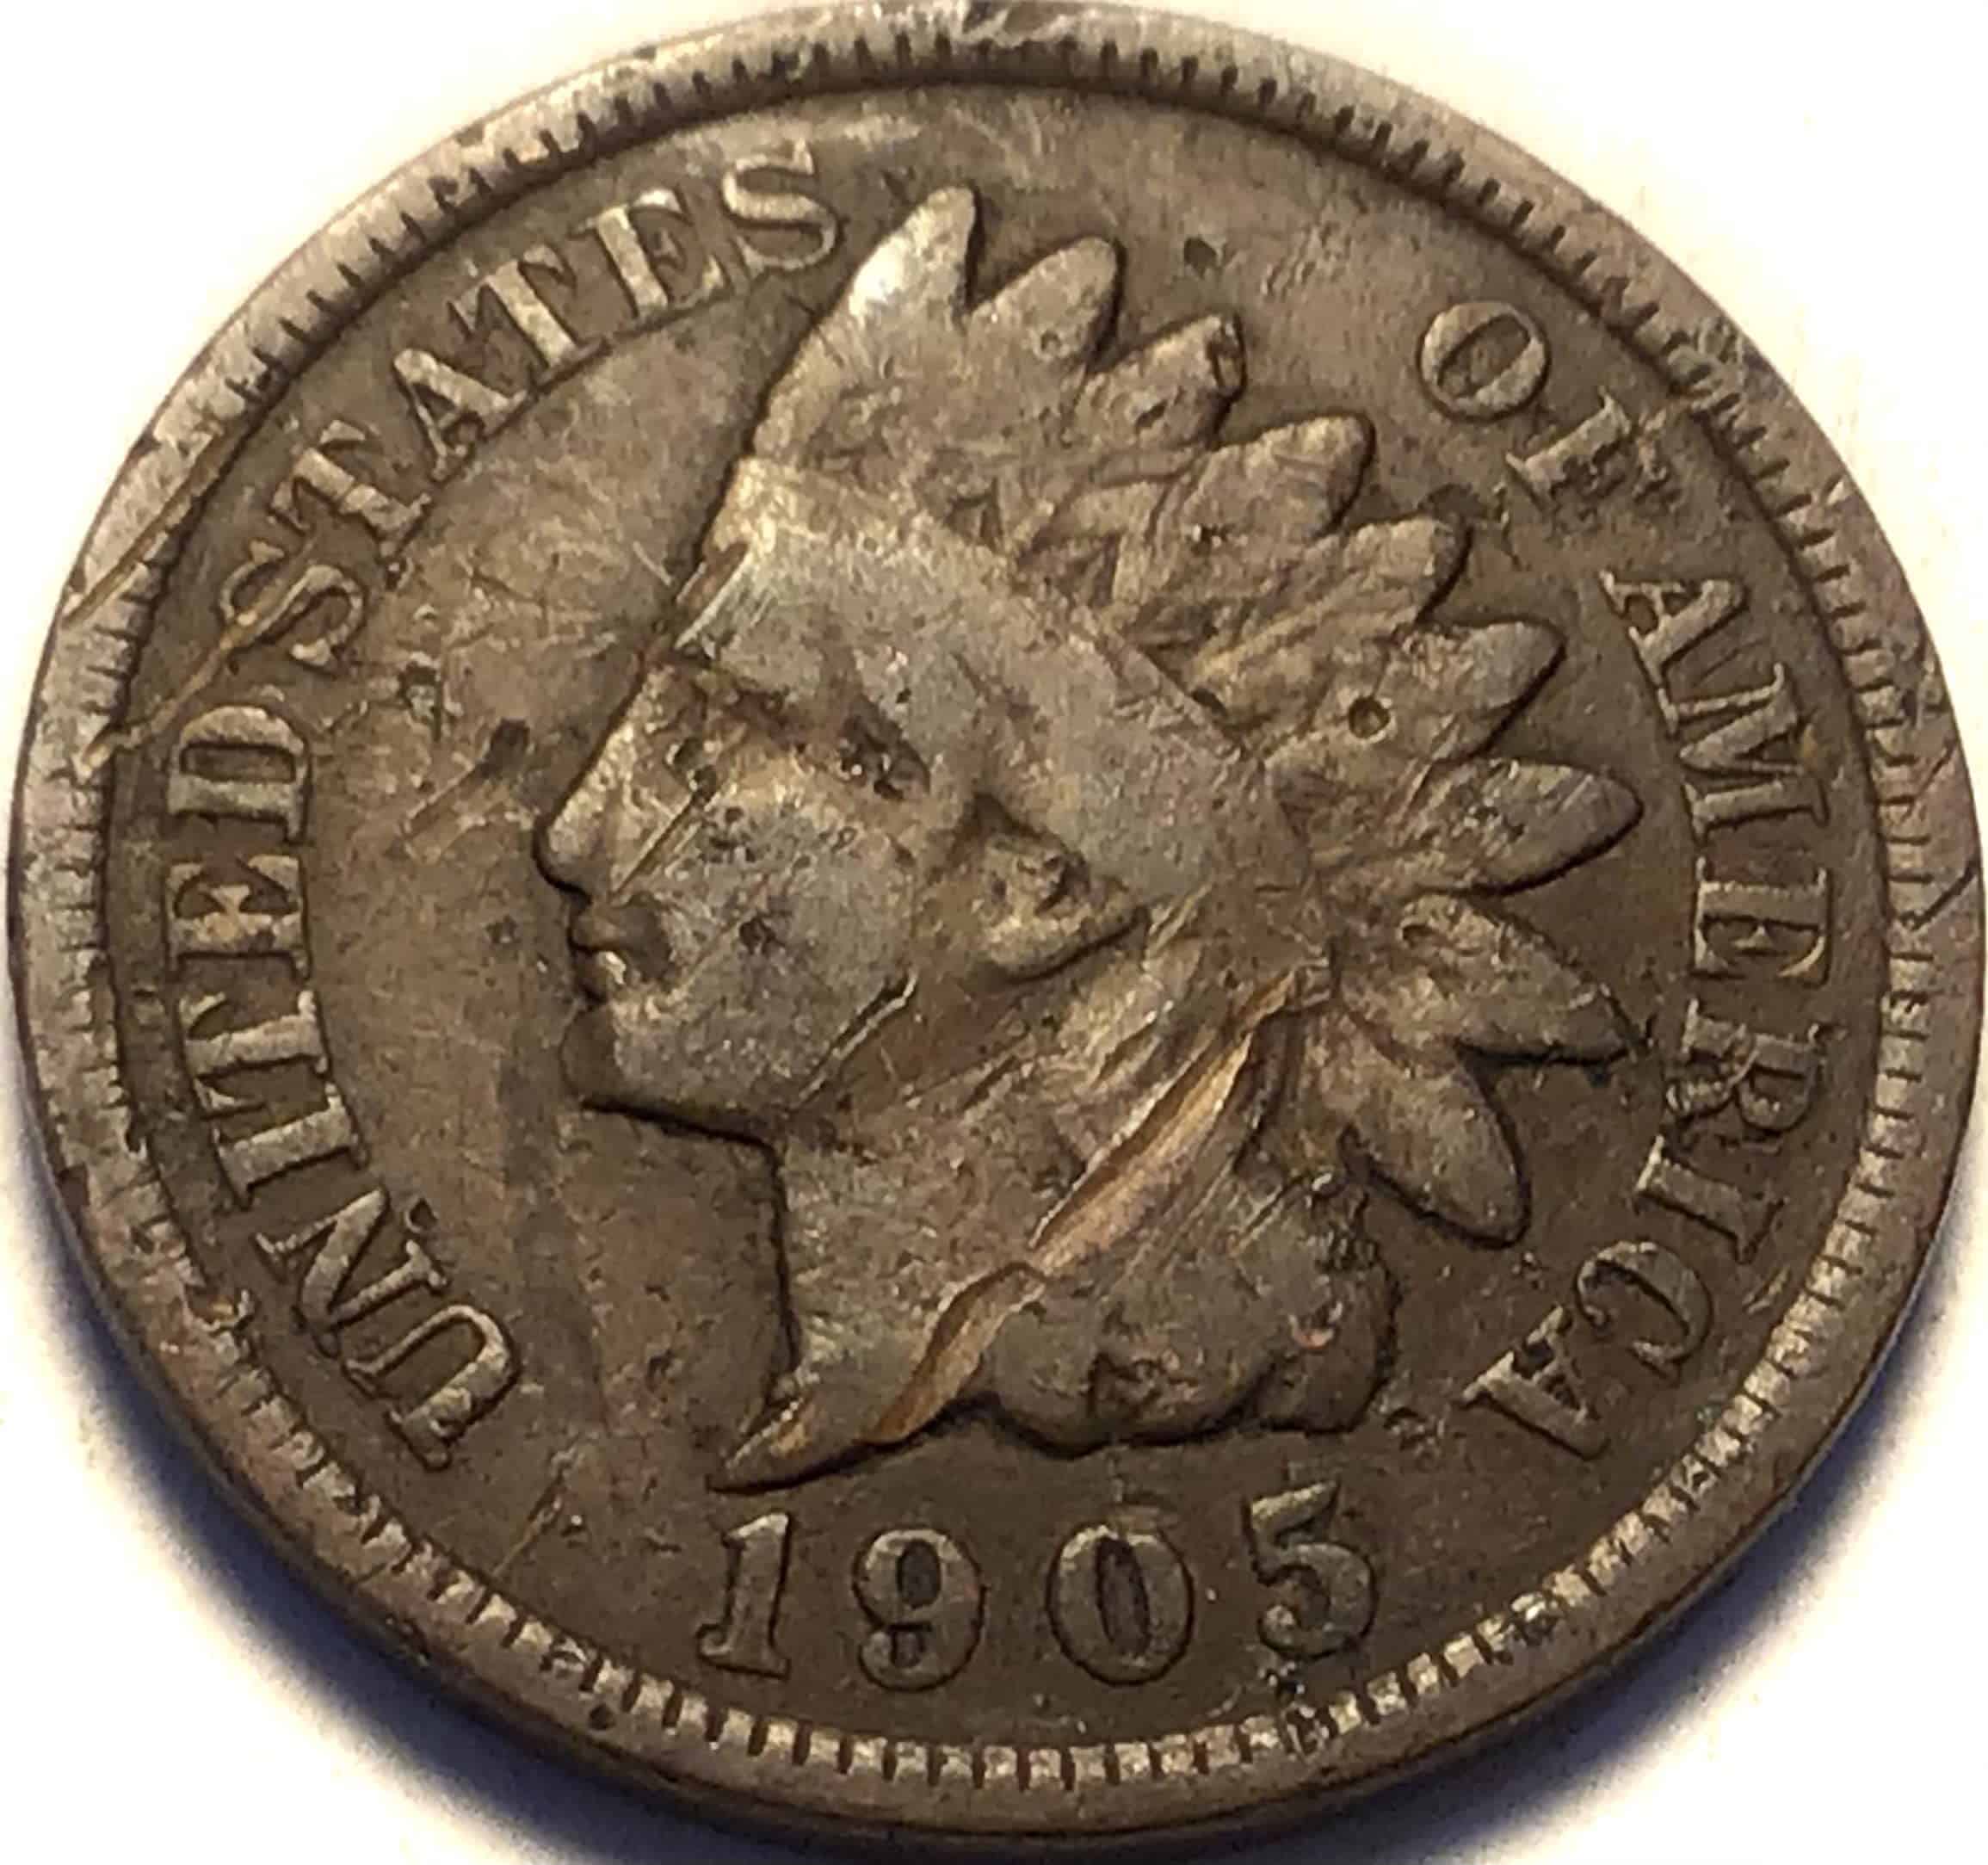 1905 Indian Head Penny Value